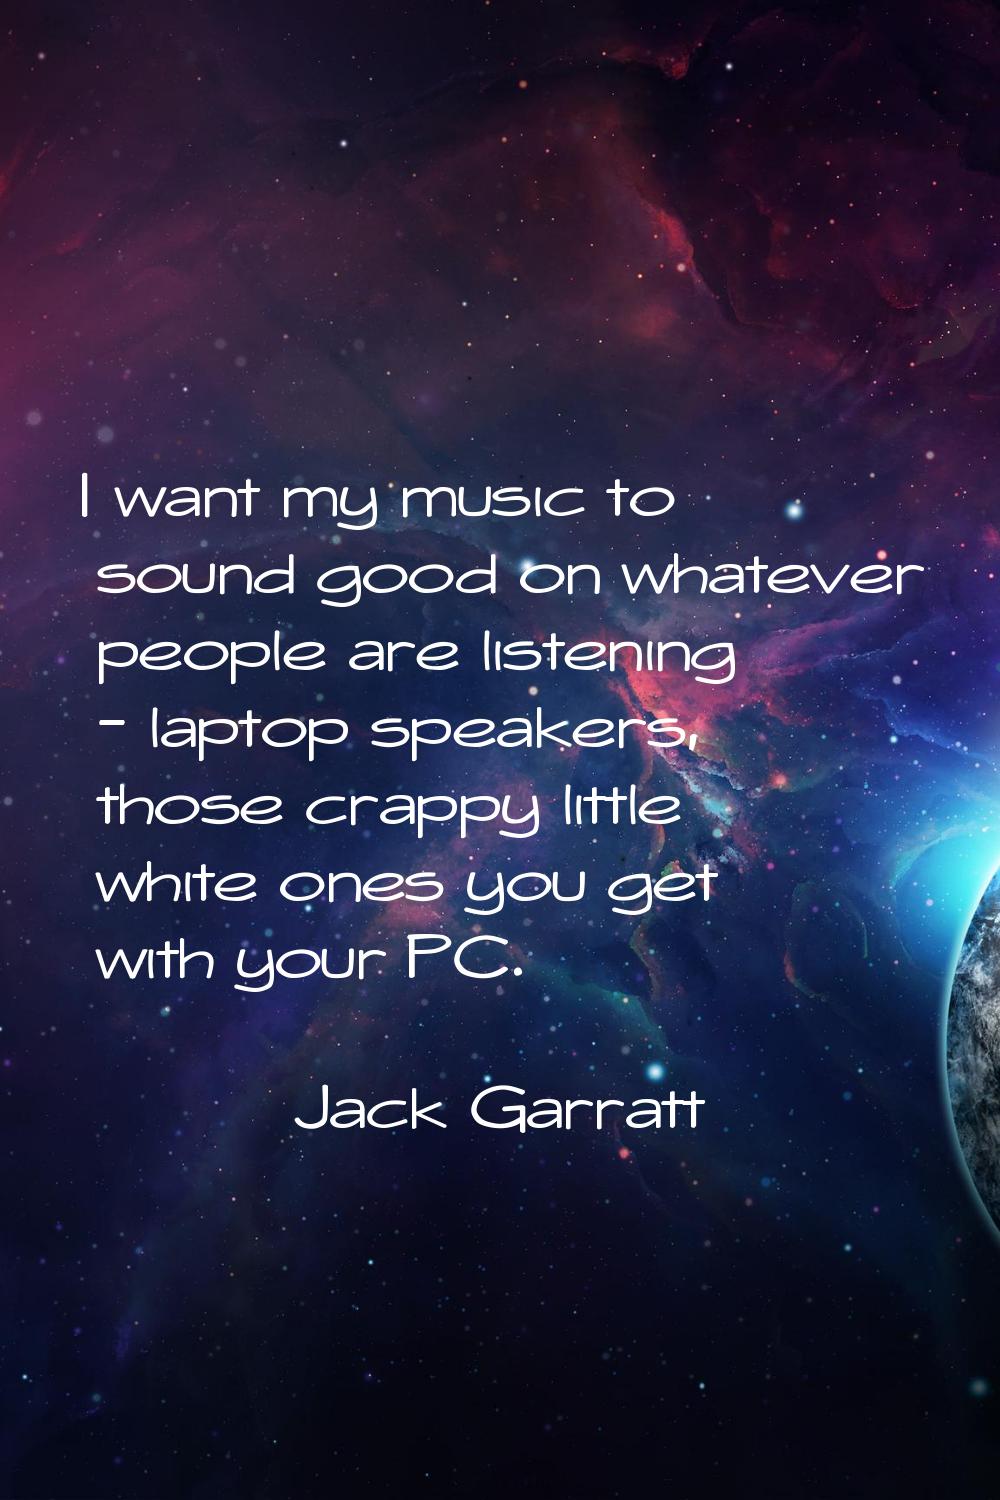 I want my music to sound good on whatever people are listening - laptop speakers, those crappy litt